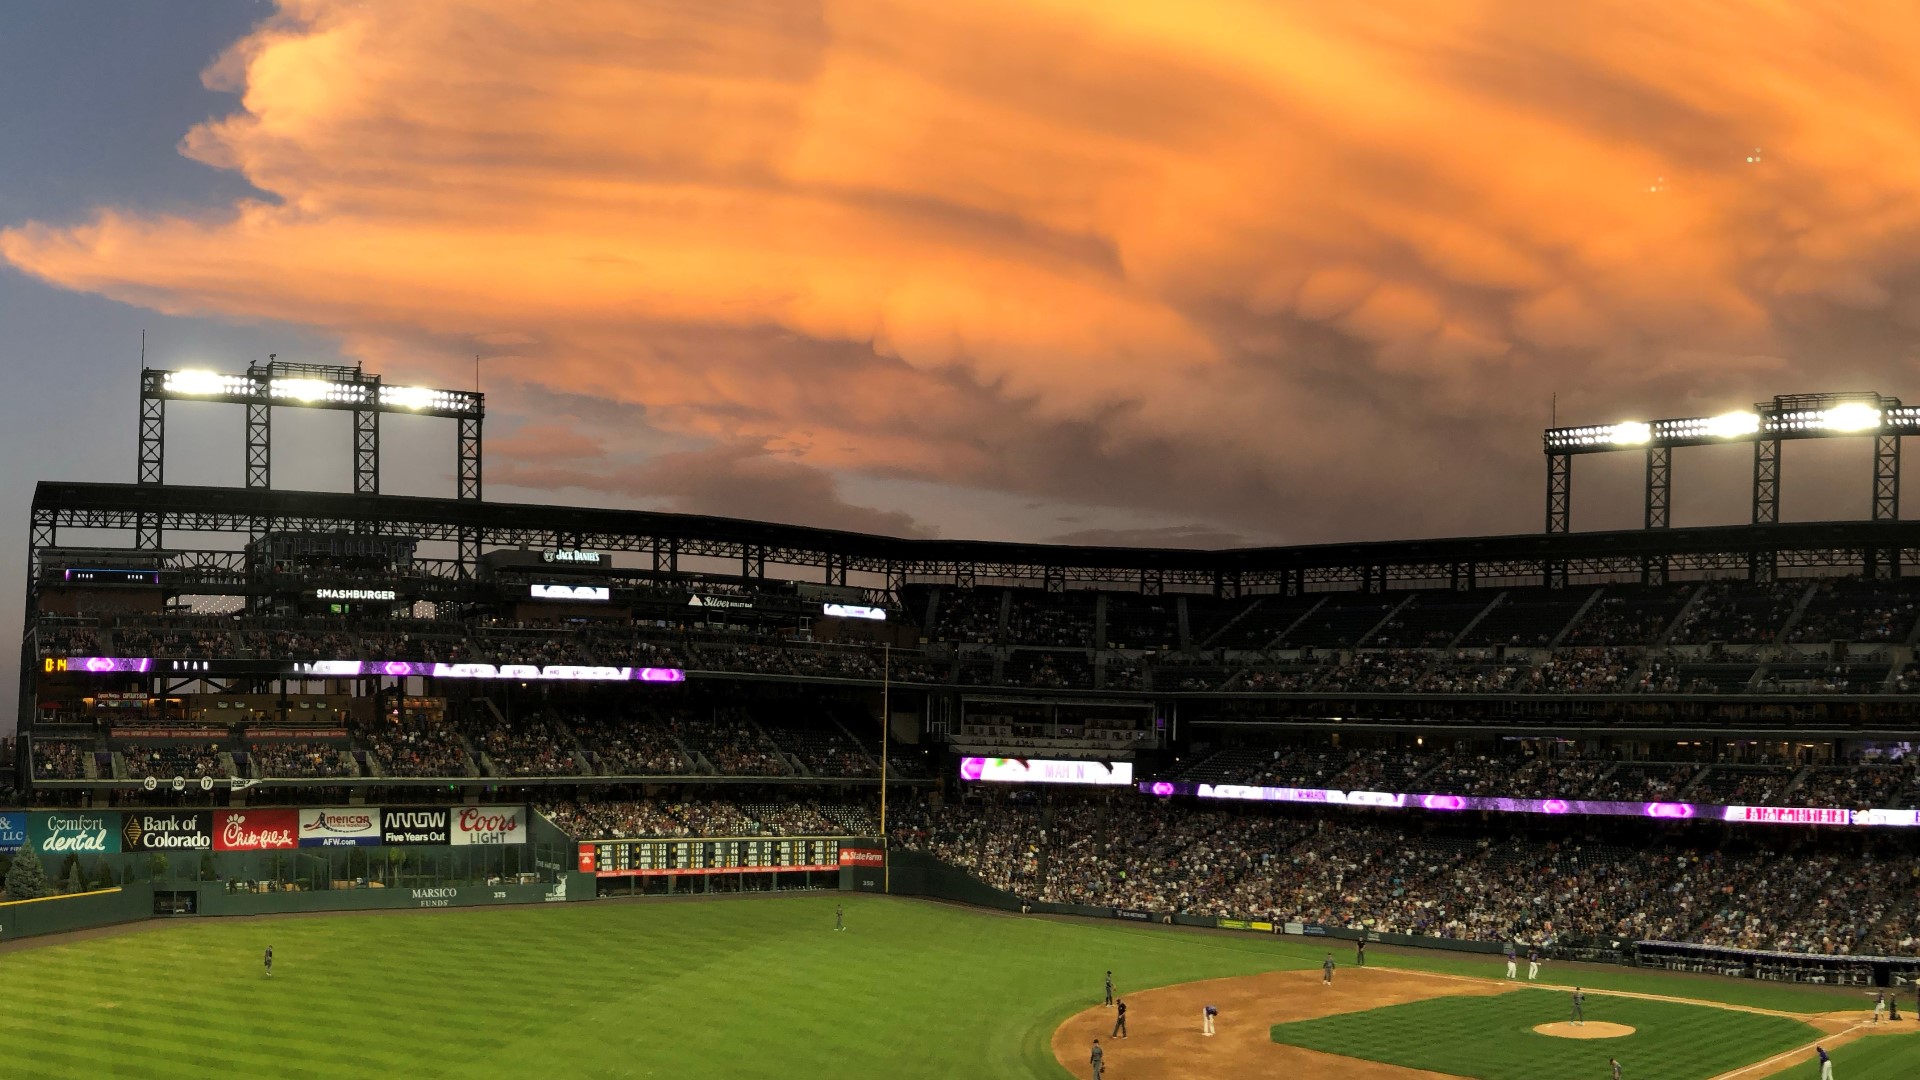 In 2019, nearly 2.9 million people have visited Coors Field.